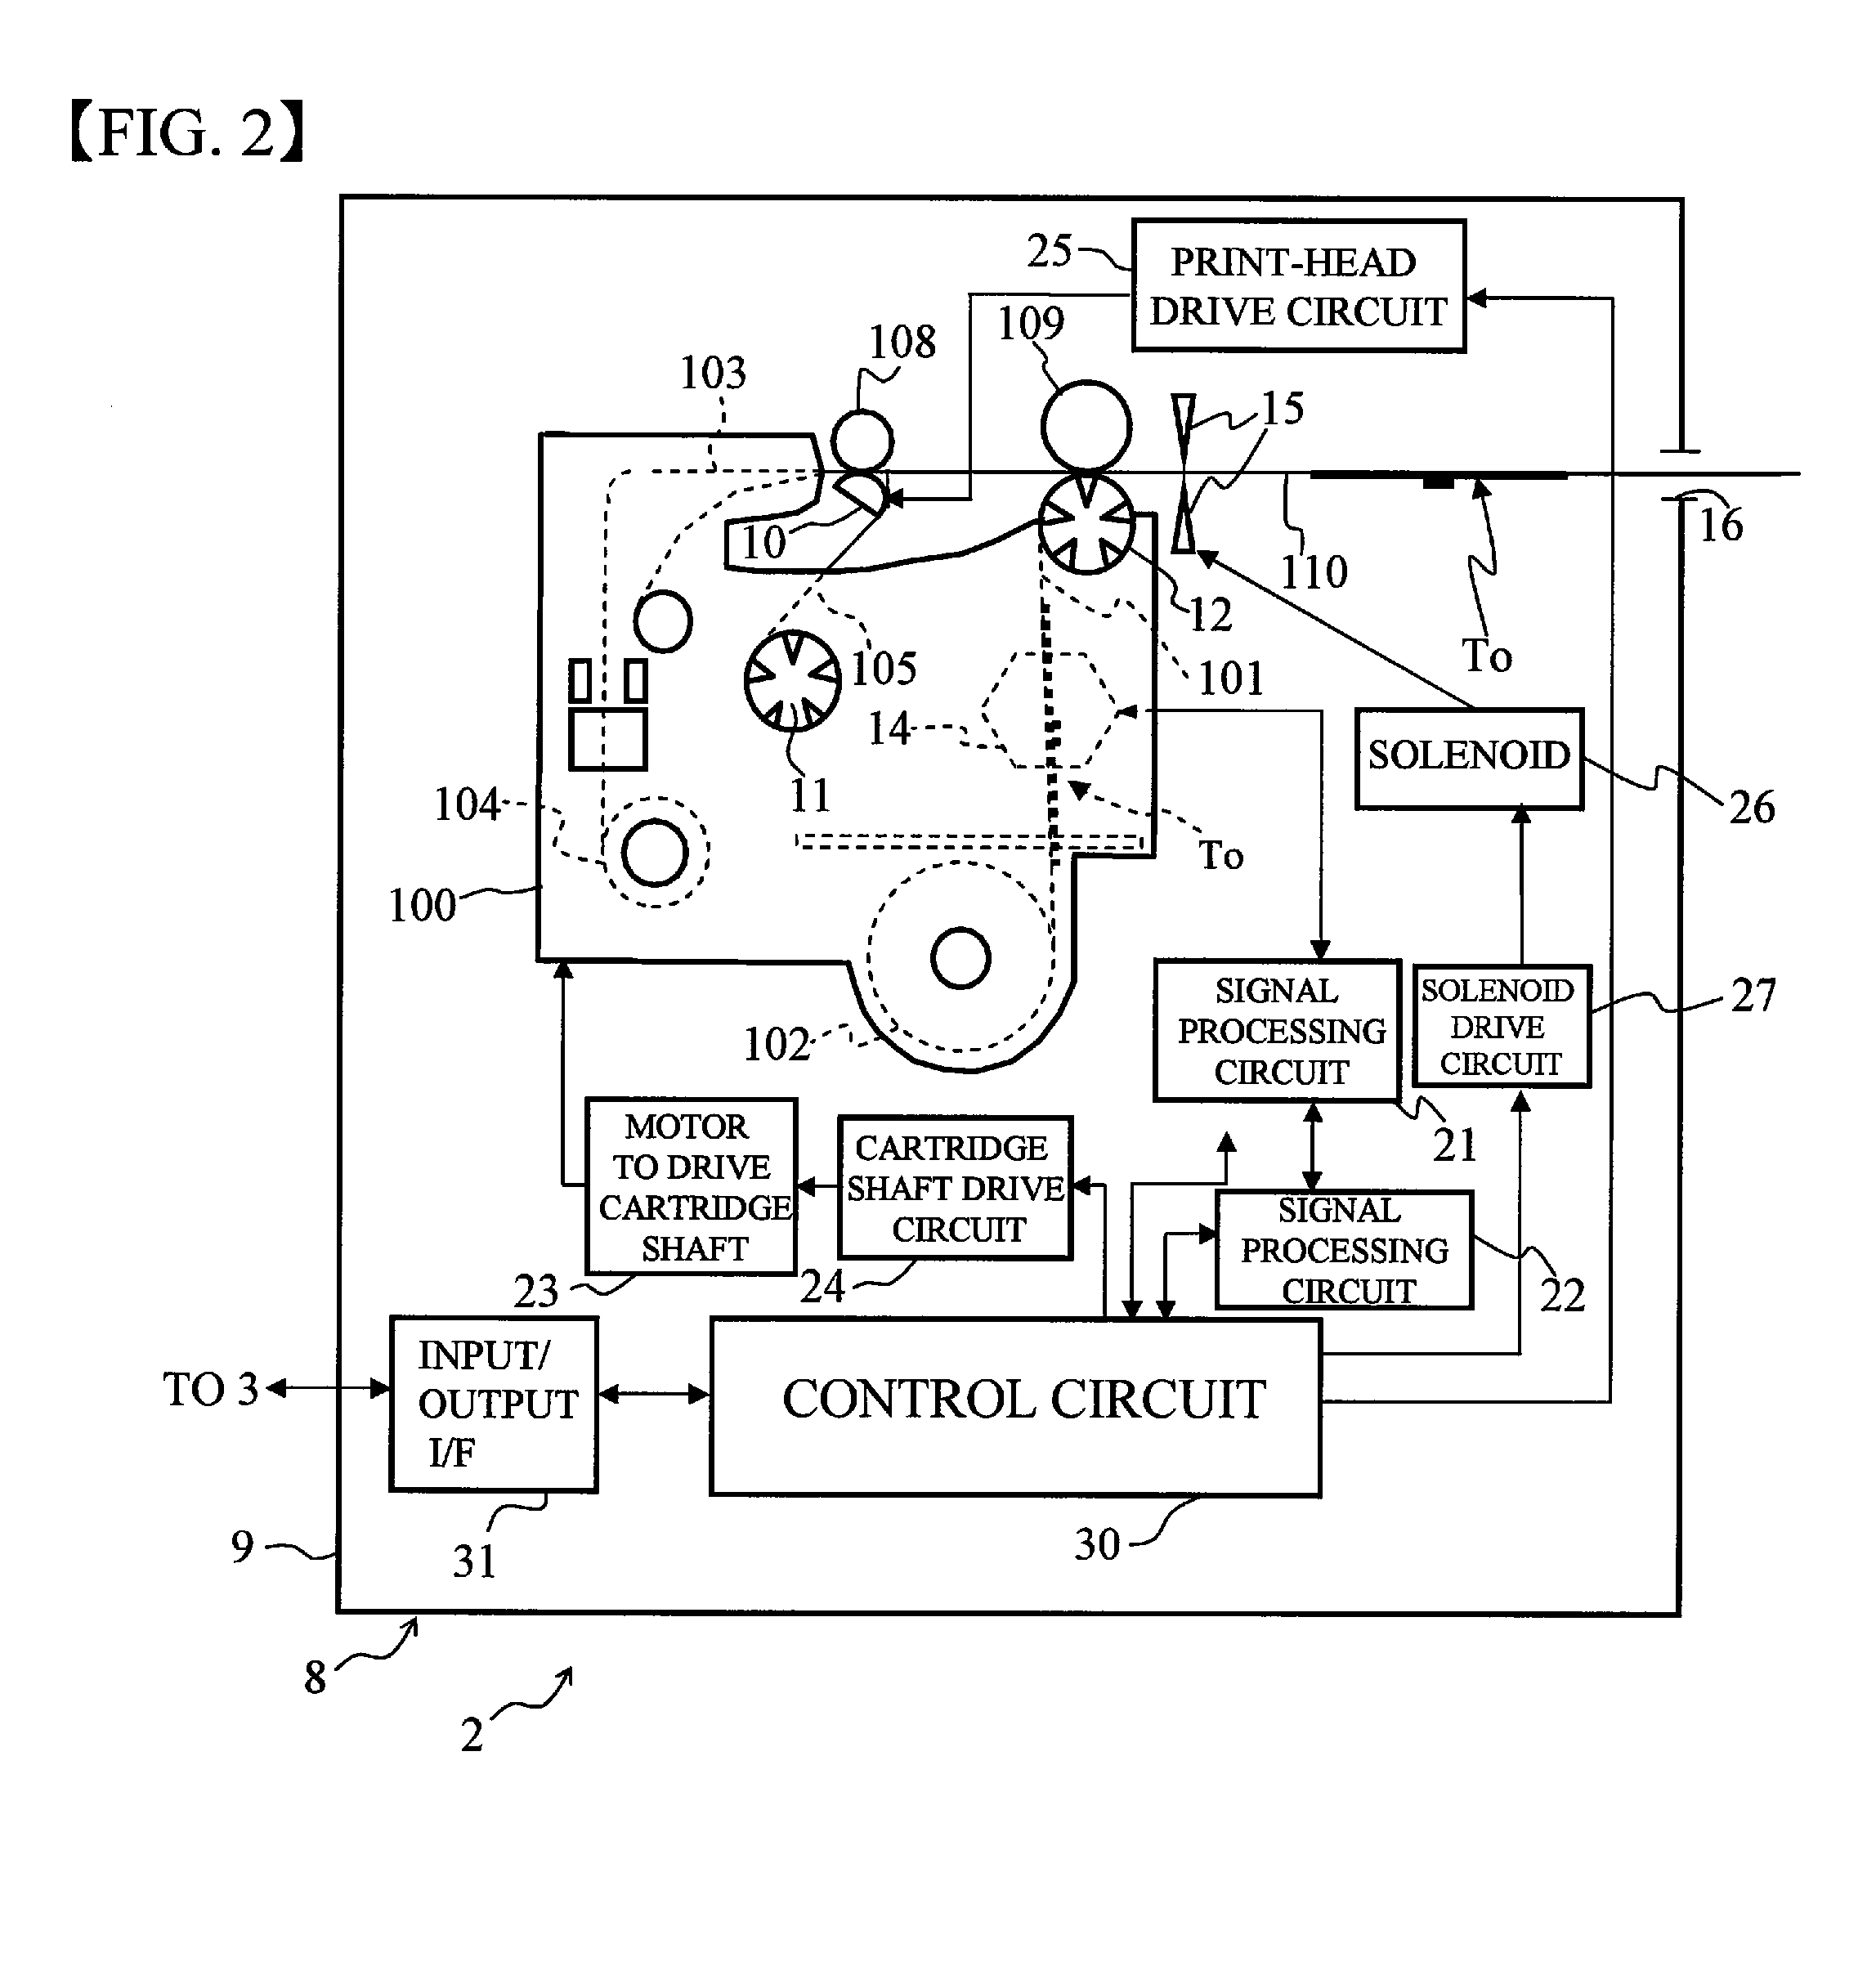 Apparatus for producing a label, apparatus for detecting a mark, apparatus for detecting a tape end, cartridge for producing a label roll of tape for producing a label, and marked tape